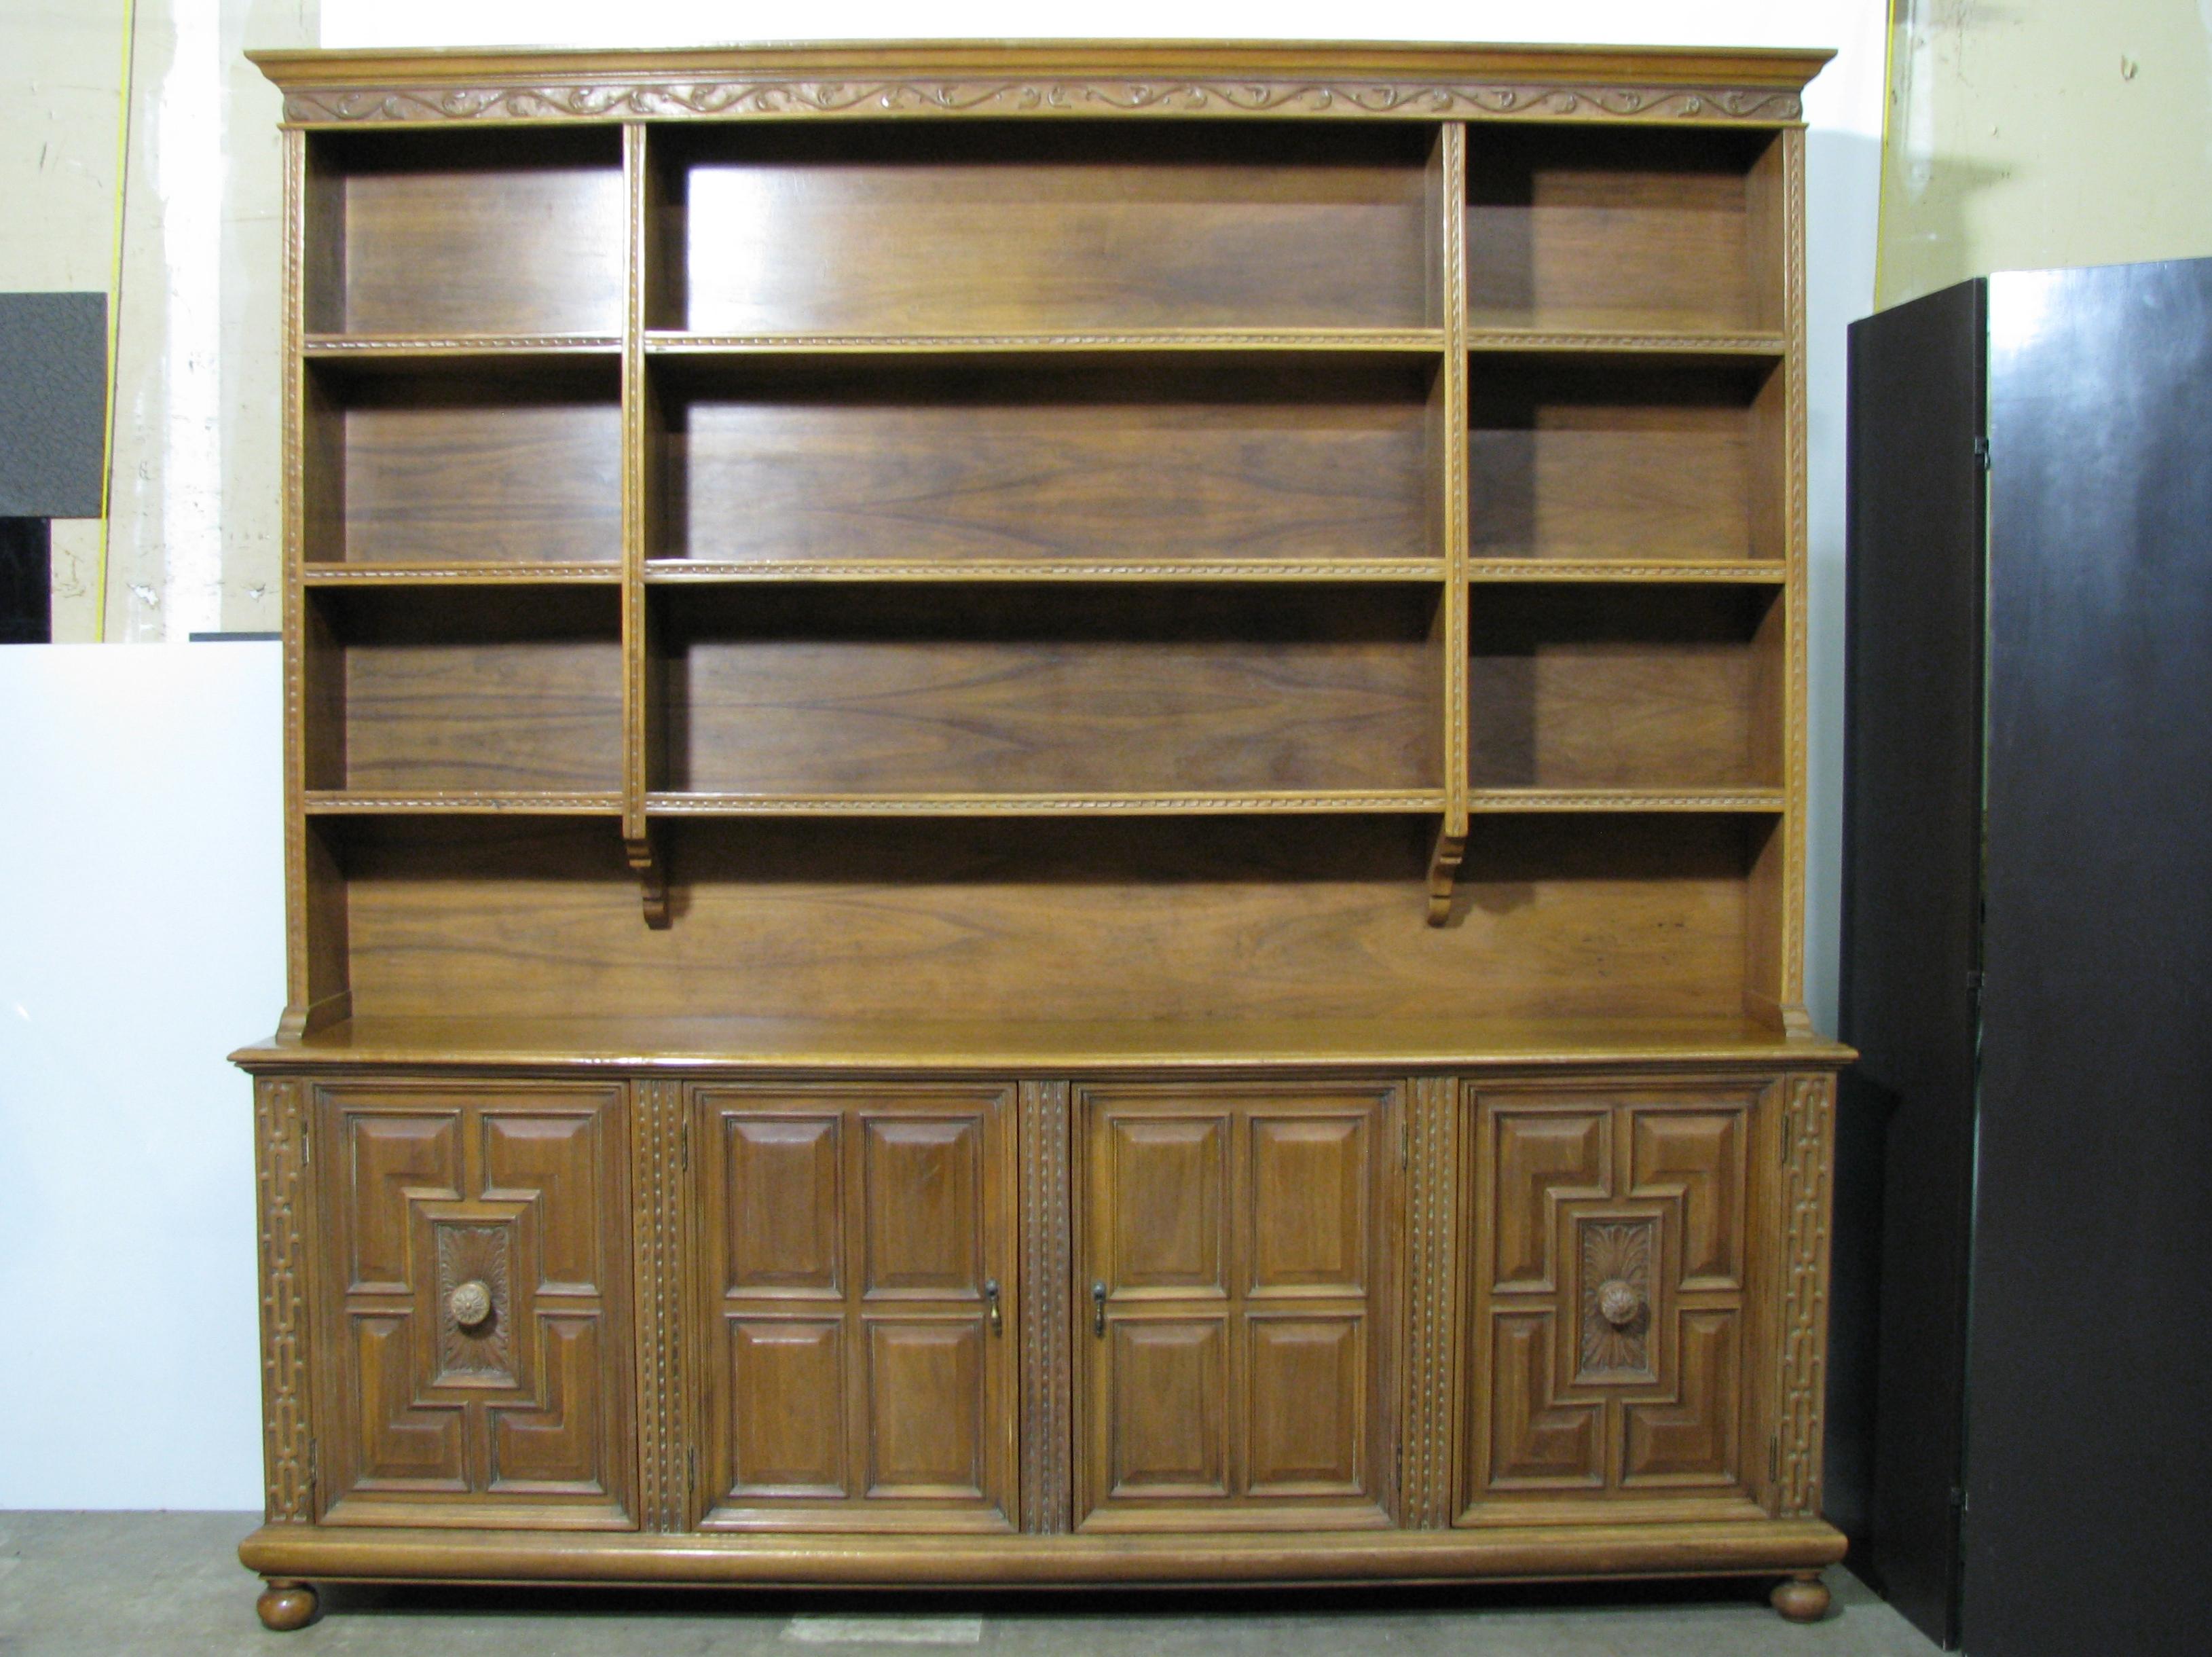 Stunning one-of-a-kind vintage Italian Renaissance style cabinet with upper shelves by custom furniture manufacturer Joseph Milbeck. Milbeck specialized in unique, period-inspired pieces for designers. This piece was designed and created for a home